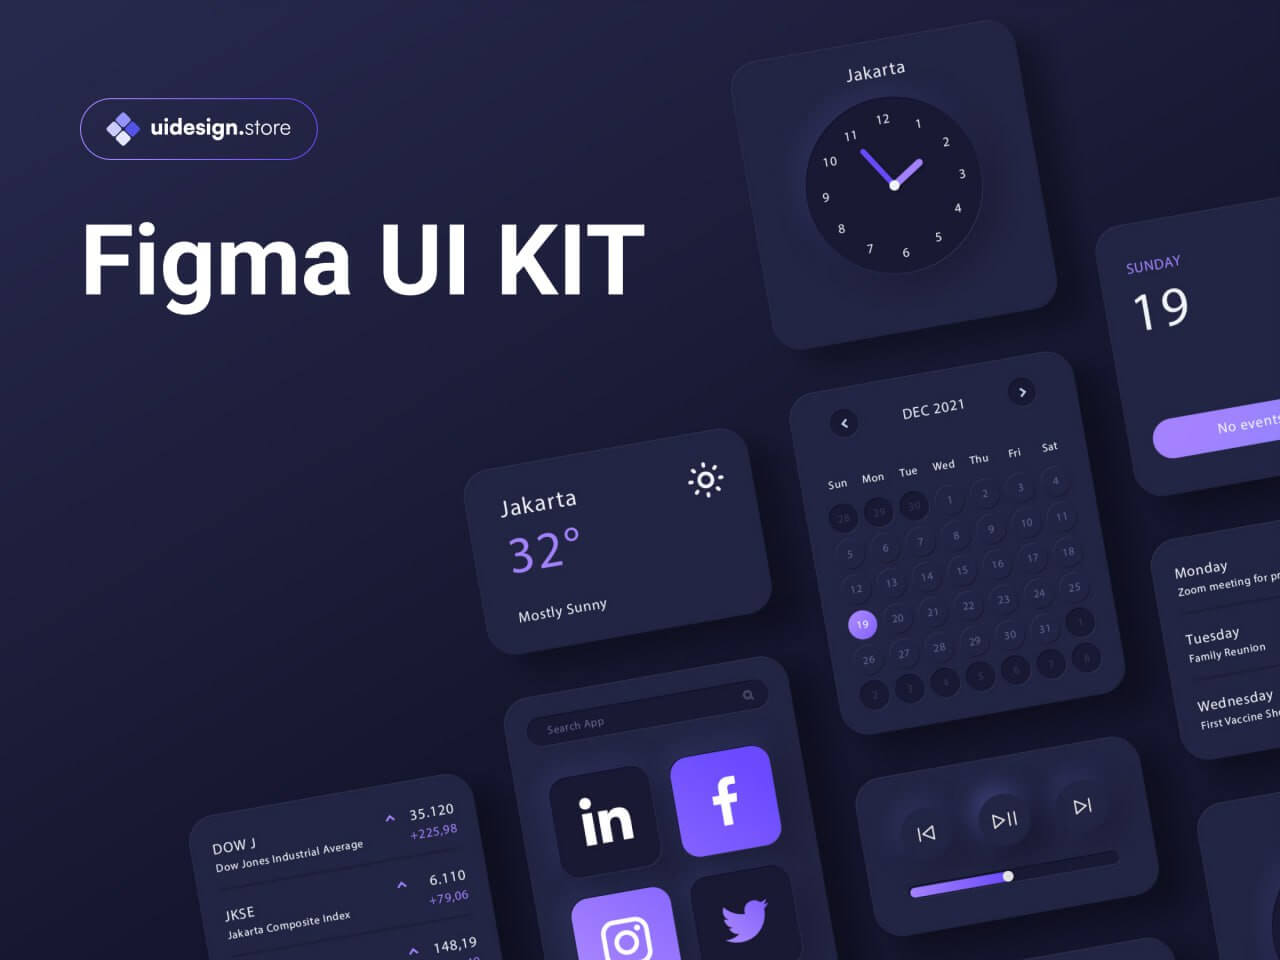 The Free Figma UI Kit provides a comprehensive collection of user interface elements and design templates.